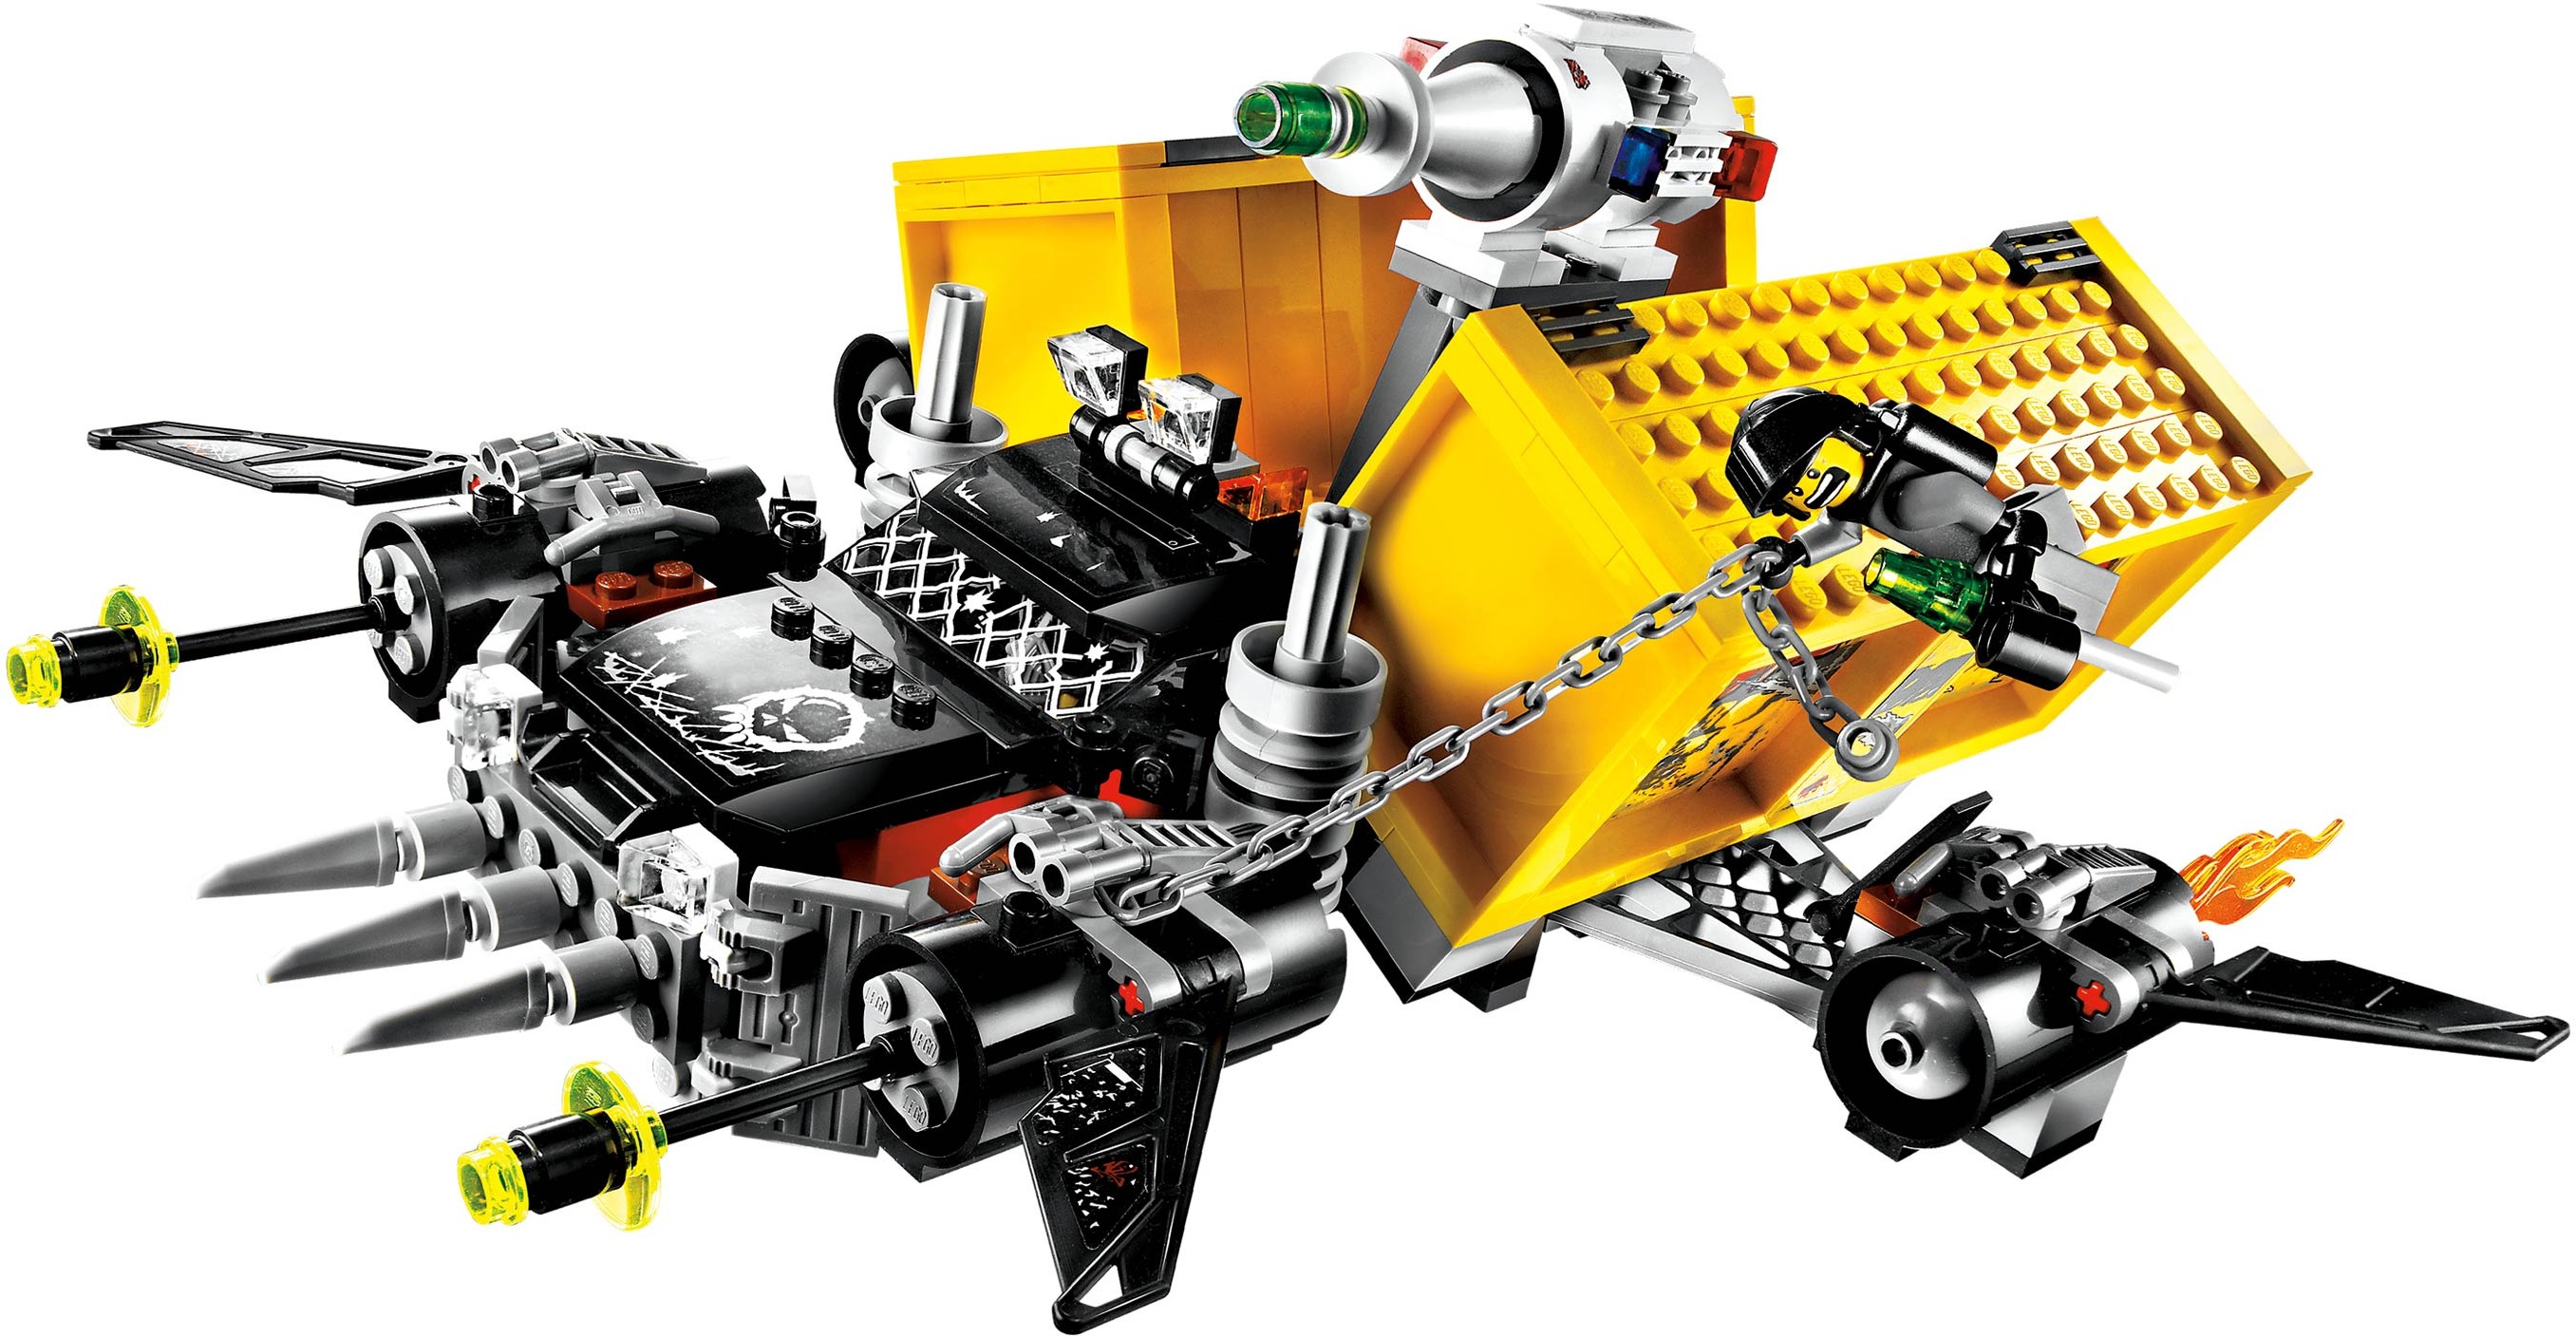 highway Vibrate cough Space | Space Police 3 | Brickset: LEGO set guide and database